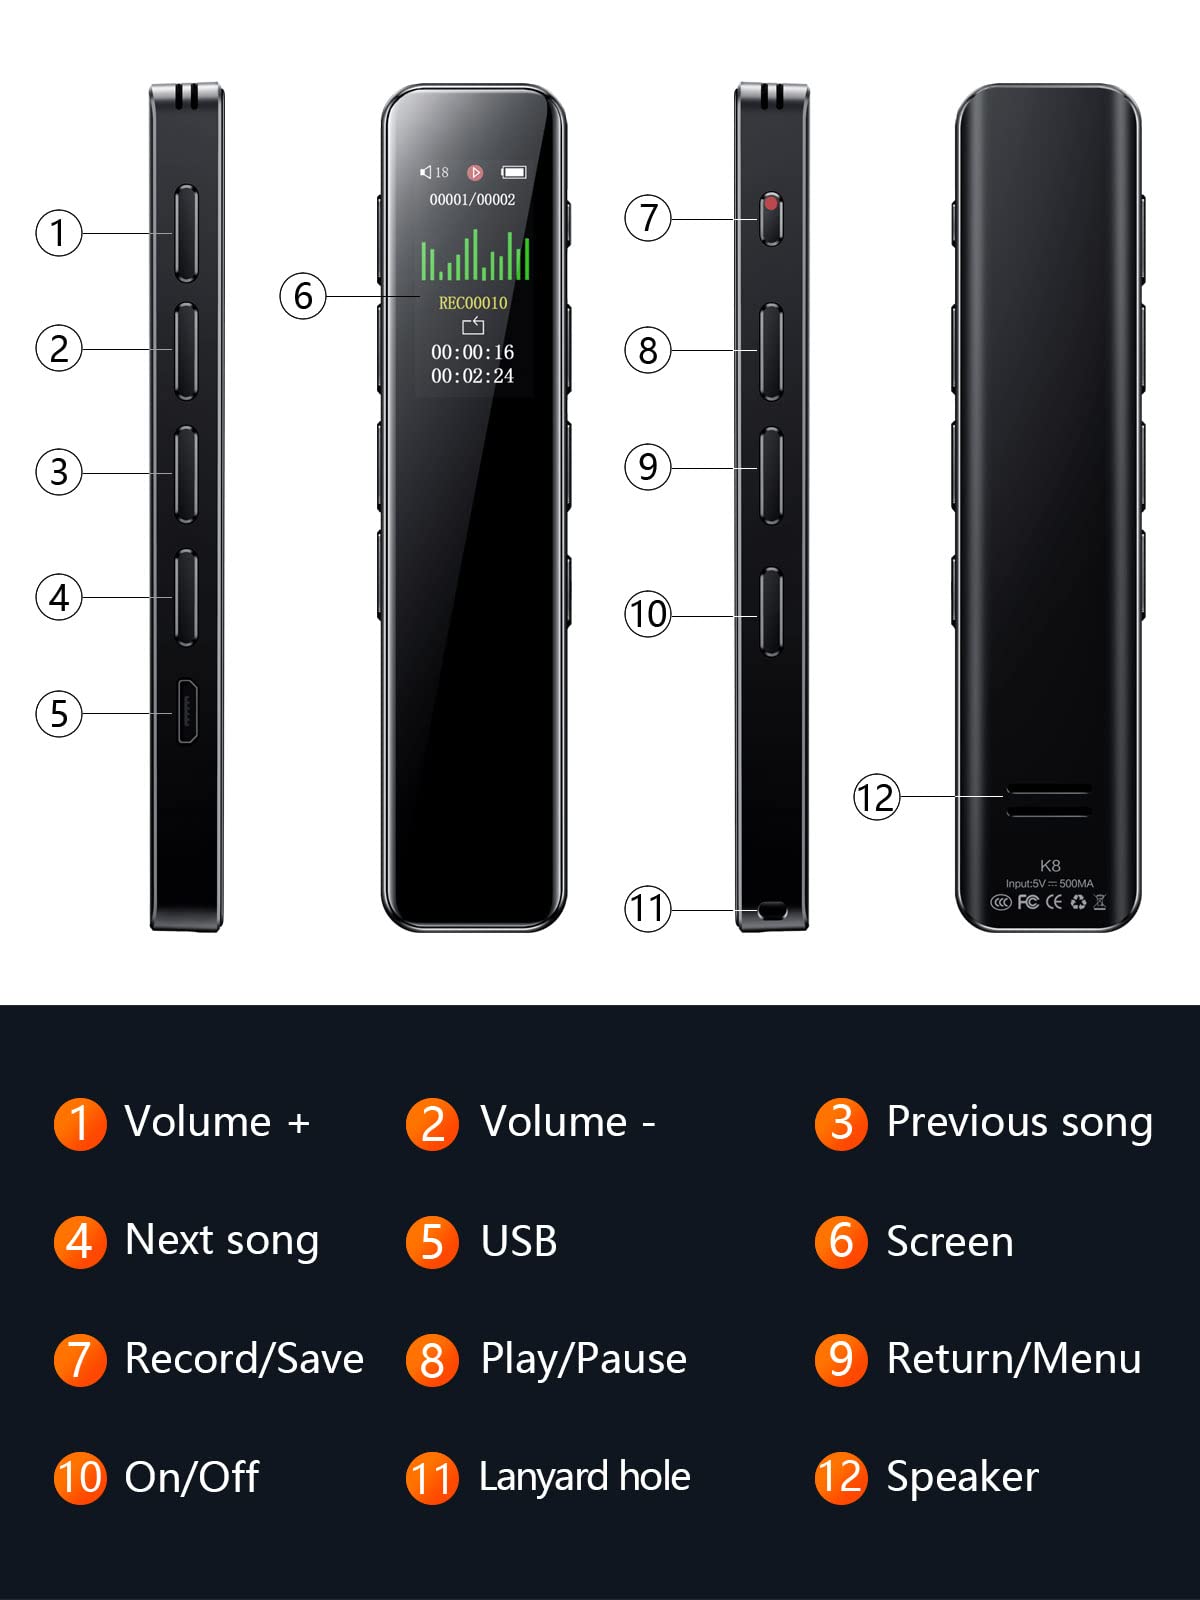 64GB Digital Voice Recorder,Fillman Voice Activated Recorder,Small Tape Recorder with Speaker, Voice Recorder for Lecture,Meetings,Class,HD Audio Dictaphone,Intelligent Noise Reduction,MP3 Player